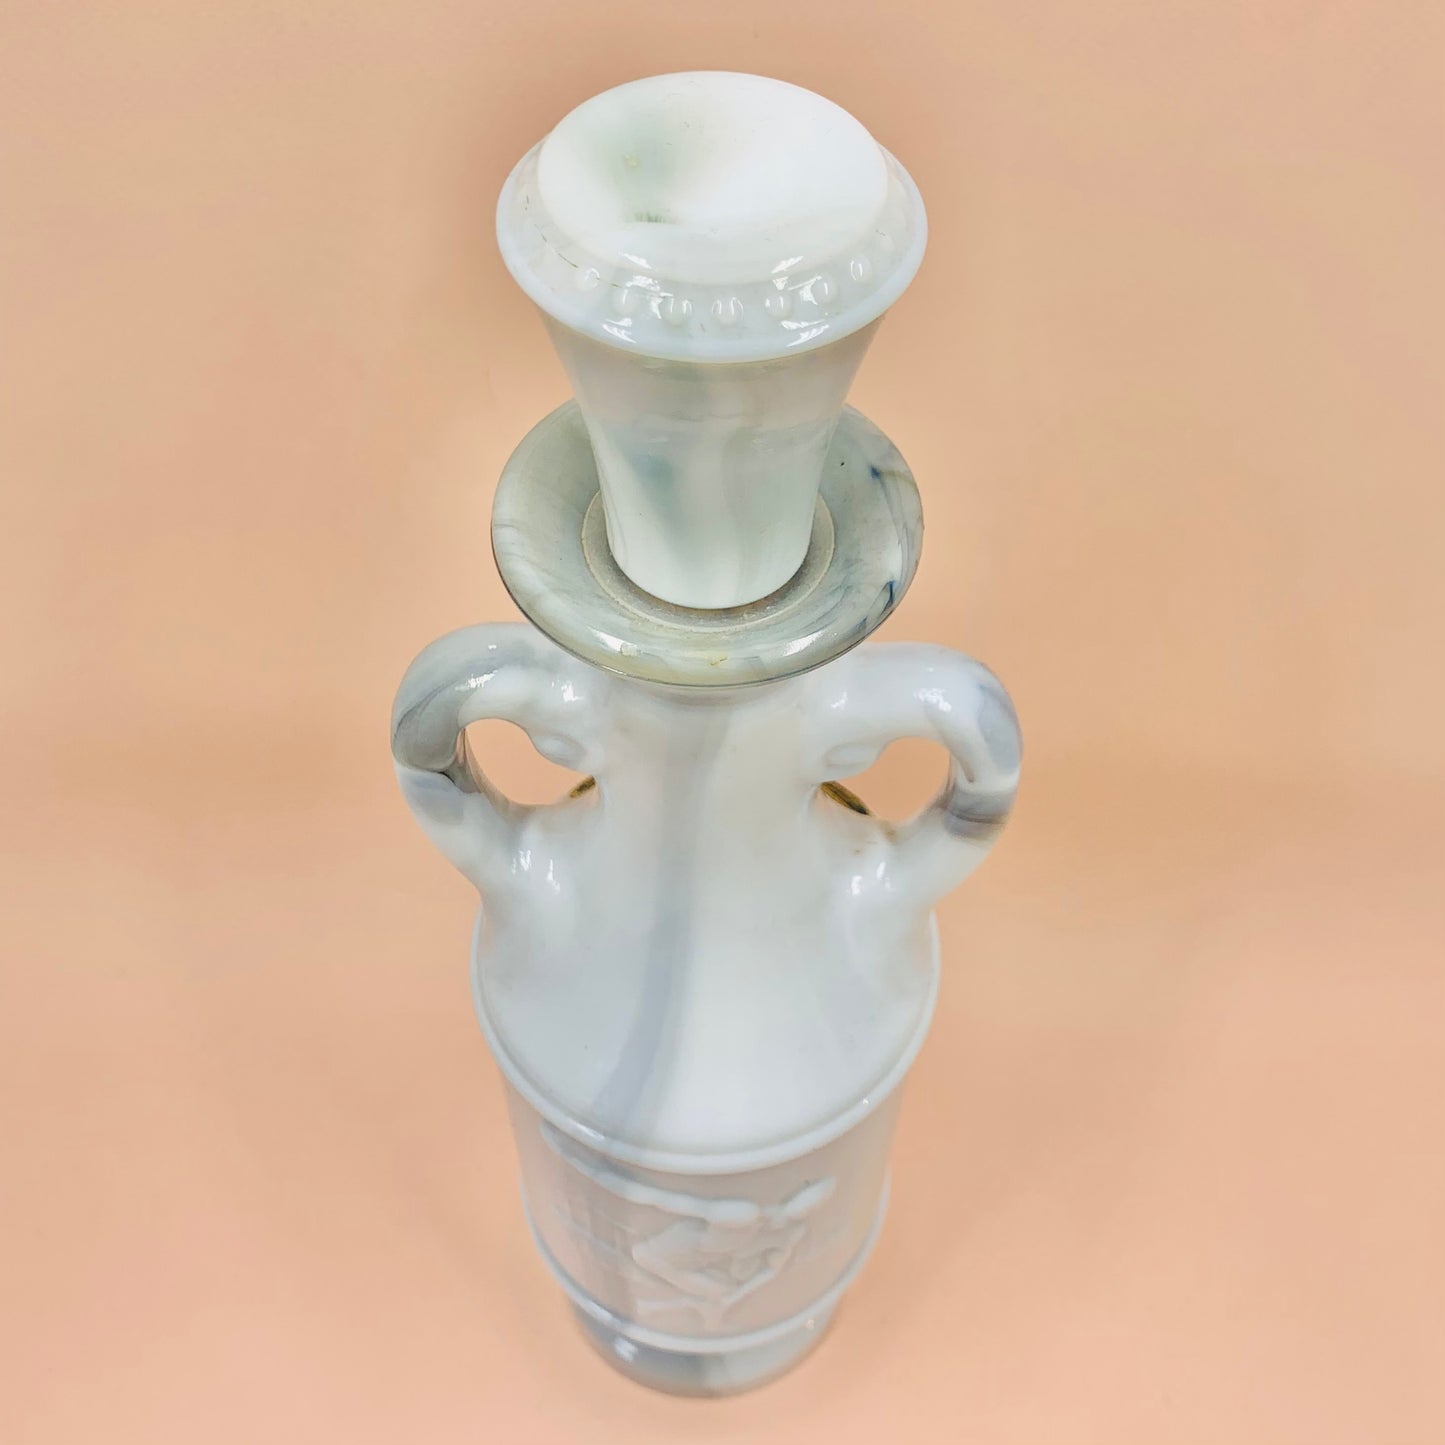 Vintage 1970s Jim Beam marble milk glass decanter for Beam’s Choice Olympic series